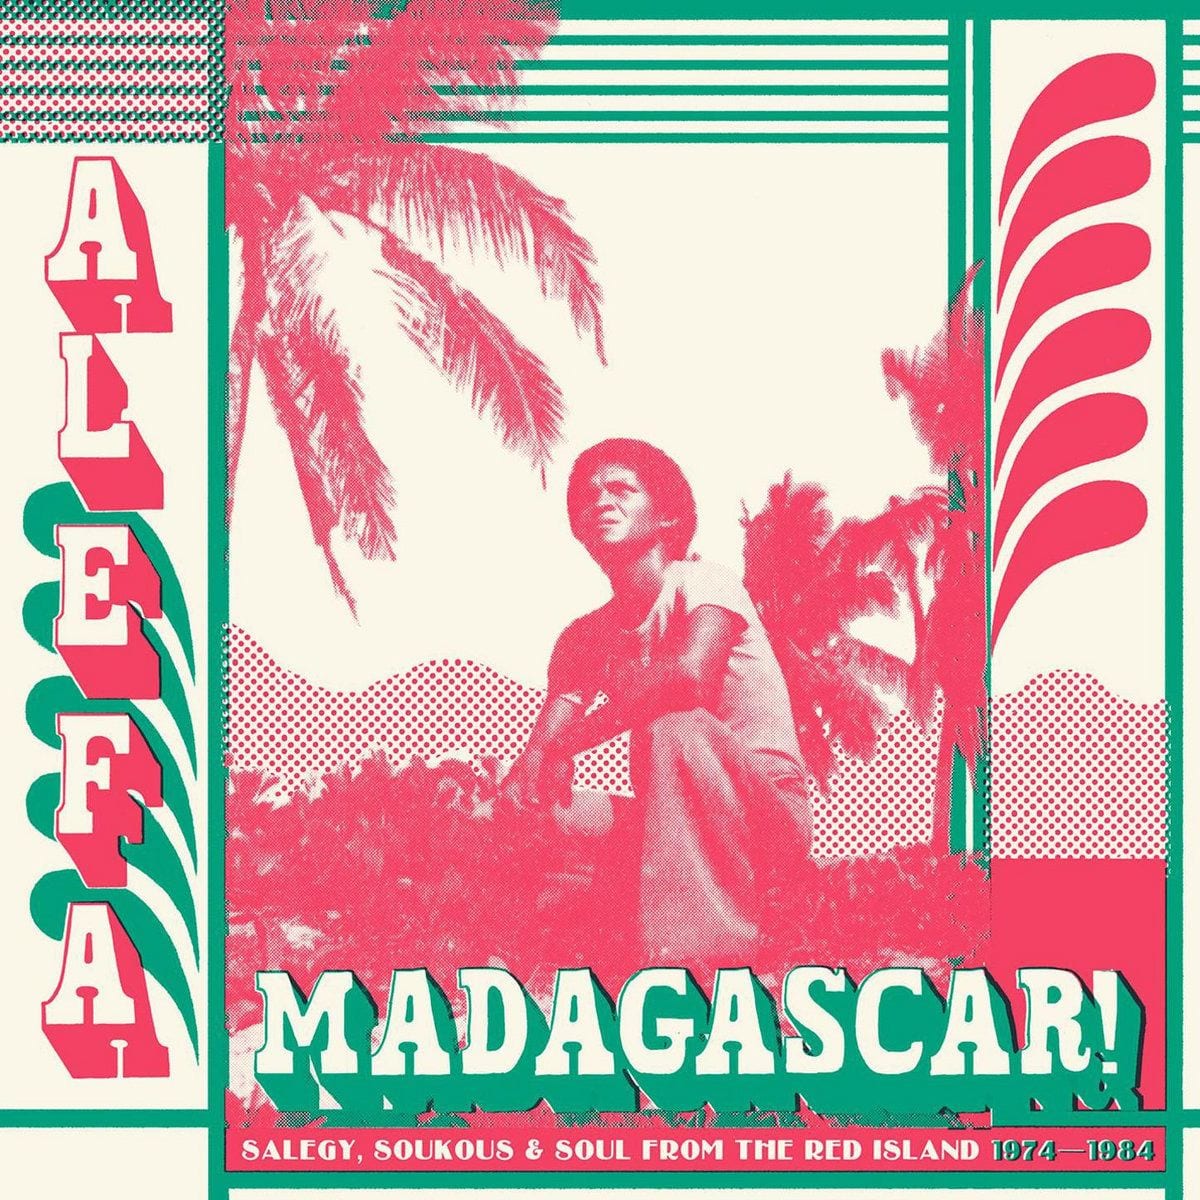 Alefa Madagascar!: Salegy, Soukous and Soul from the Red Island 1974-1984